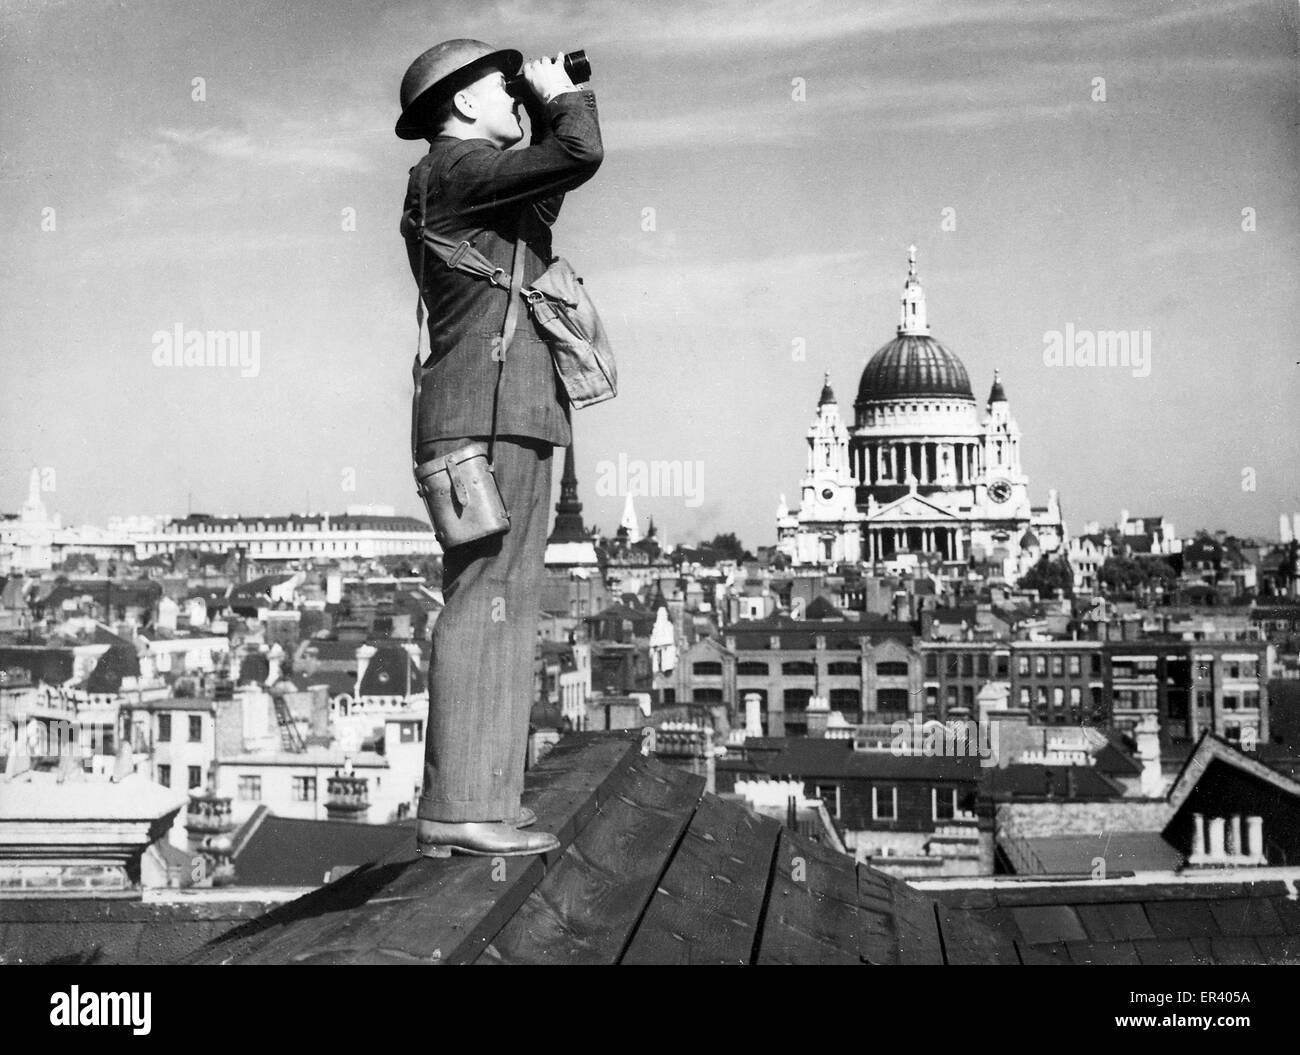 A Royal Observer Corps spotter scans the skies of London. Battle of Britain air observer keeping watch over London Stock Photo